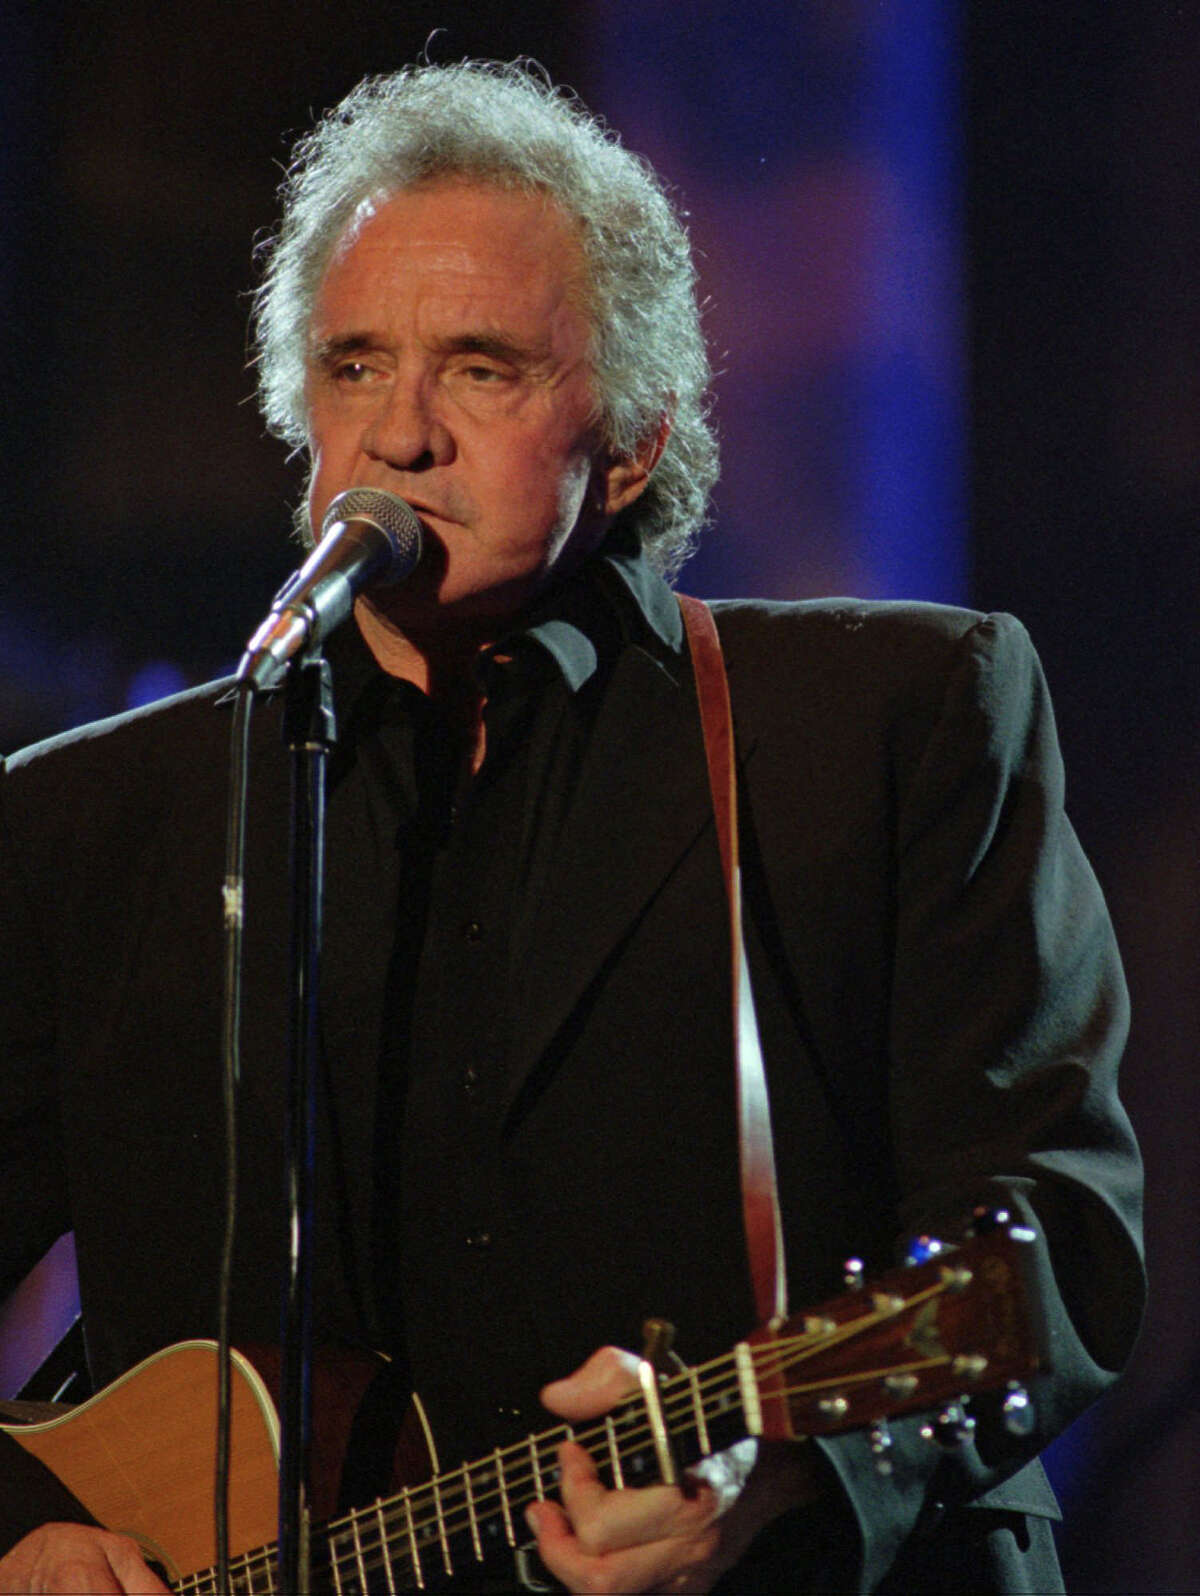 FILE - In this Sept. 2, 1995 file photo, Johnny Cash performs during his segment of the Concert for the Rock and Roll Hall of Fame in Cleveland. The city of Folsom has completed the first section of its âJohnny Cash Trailâ that will pay tribute to the country music icon and his 1968 album âAt Folsom Prison.â City officials planned to unveil the first section of the 2.5-mile trail on Saturday, Oct. 4, 2014, a pedestrian and bike bridge designed to echo Folsom State Prisonâs east gate guard towers (AP Photo/Mark Duncan)